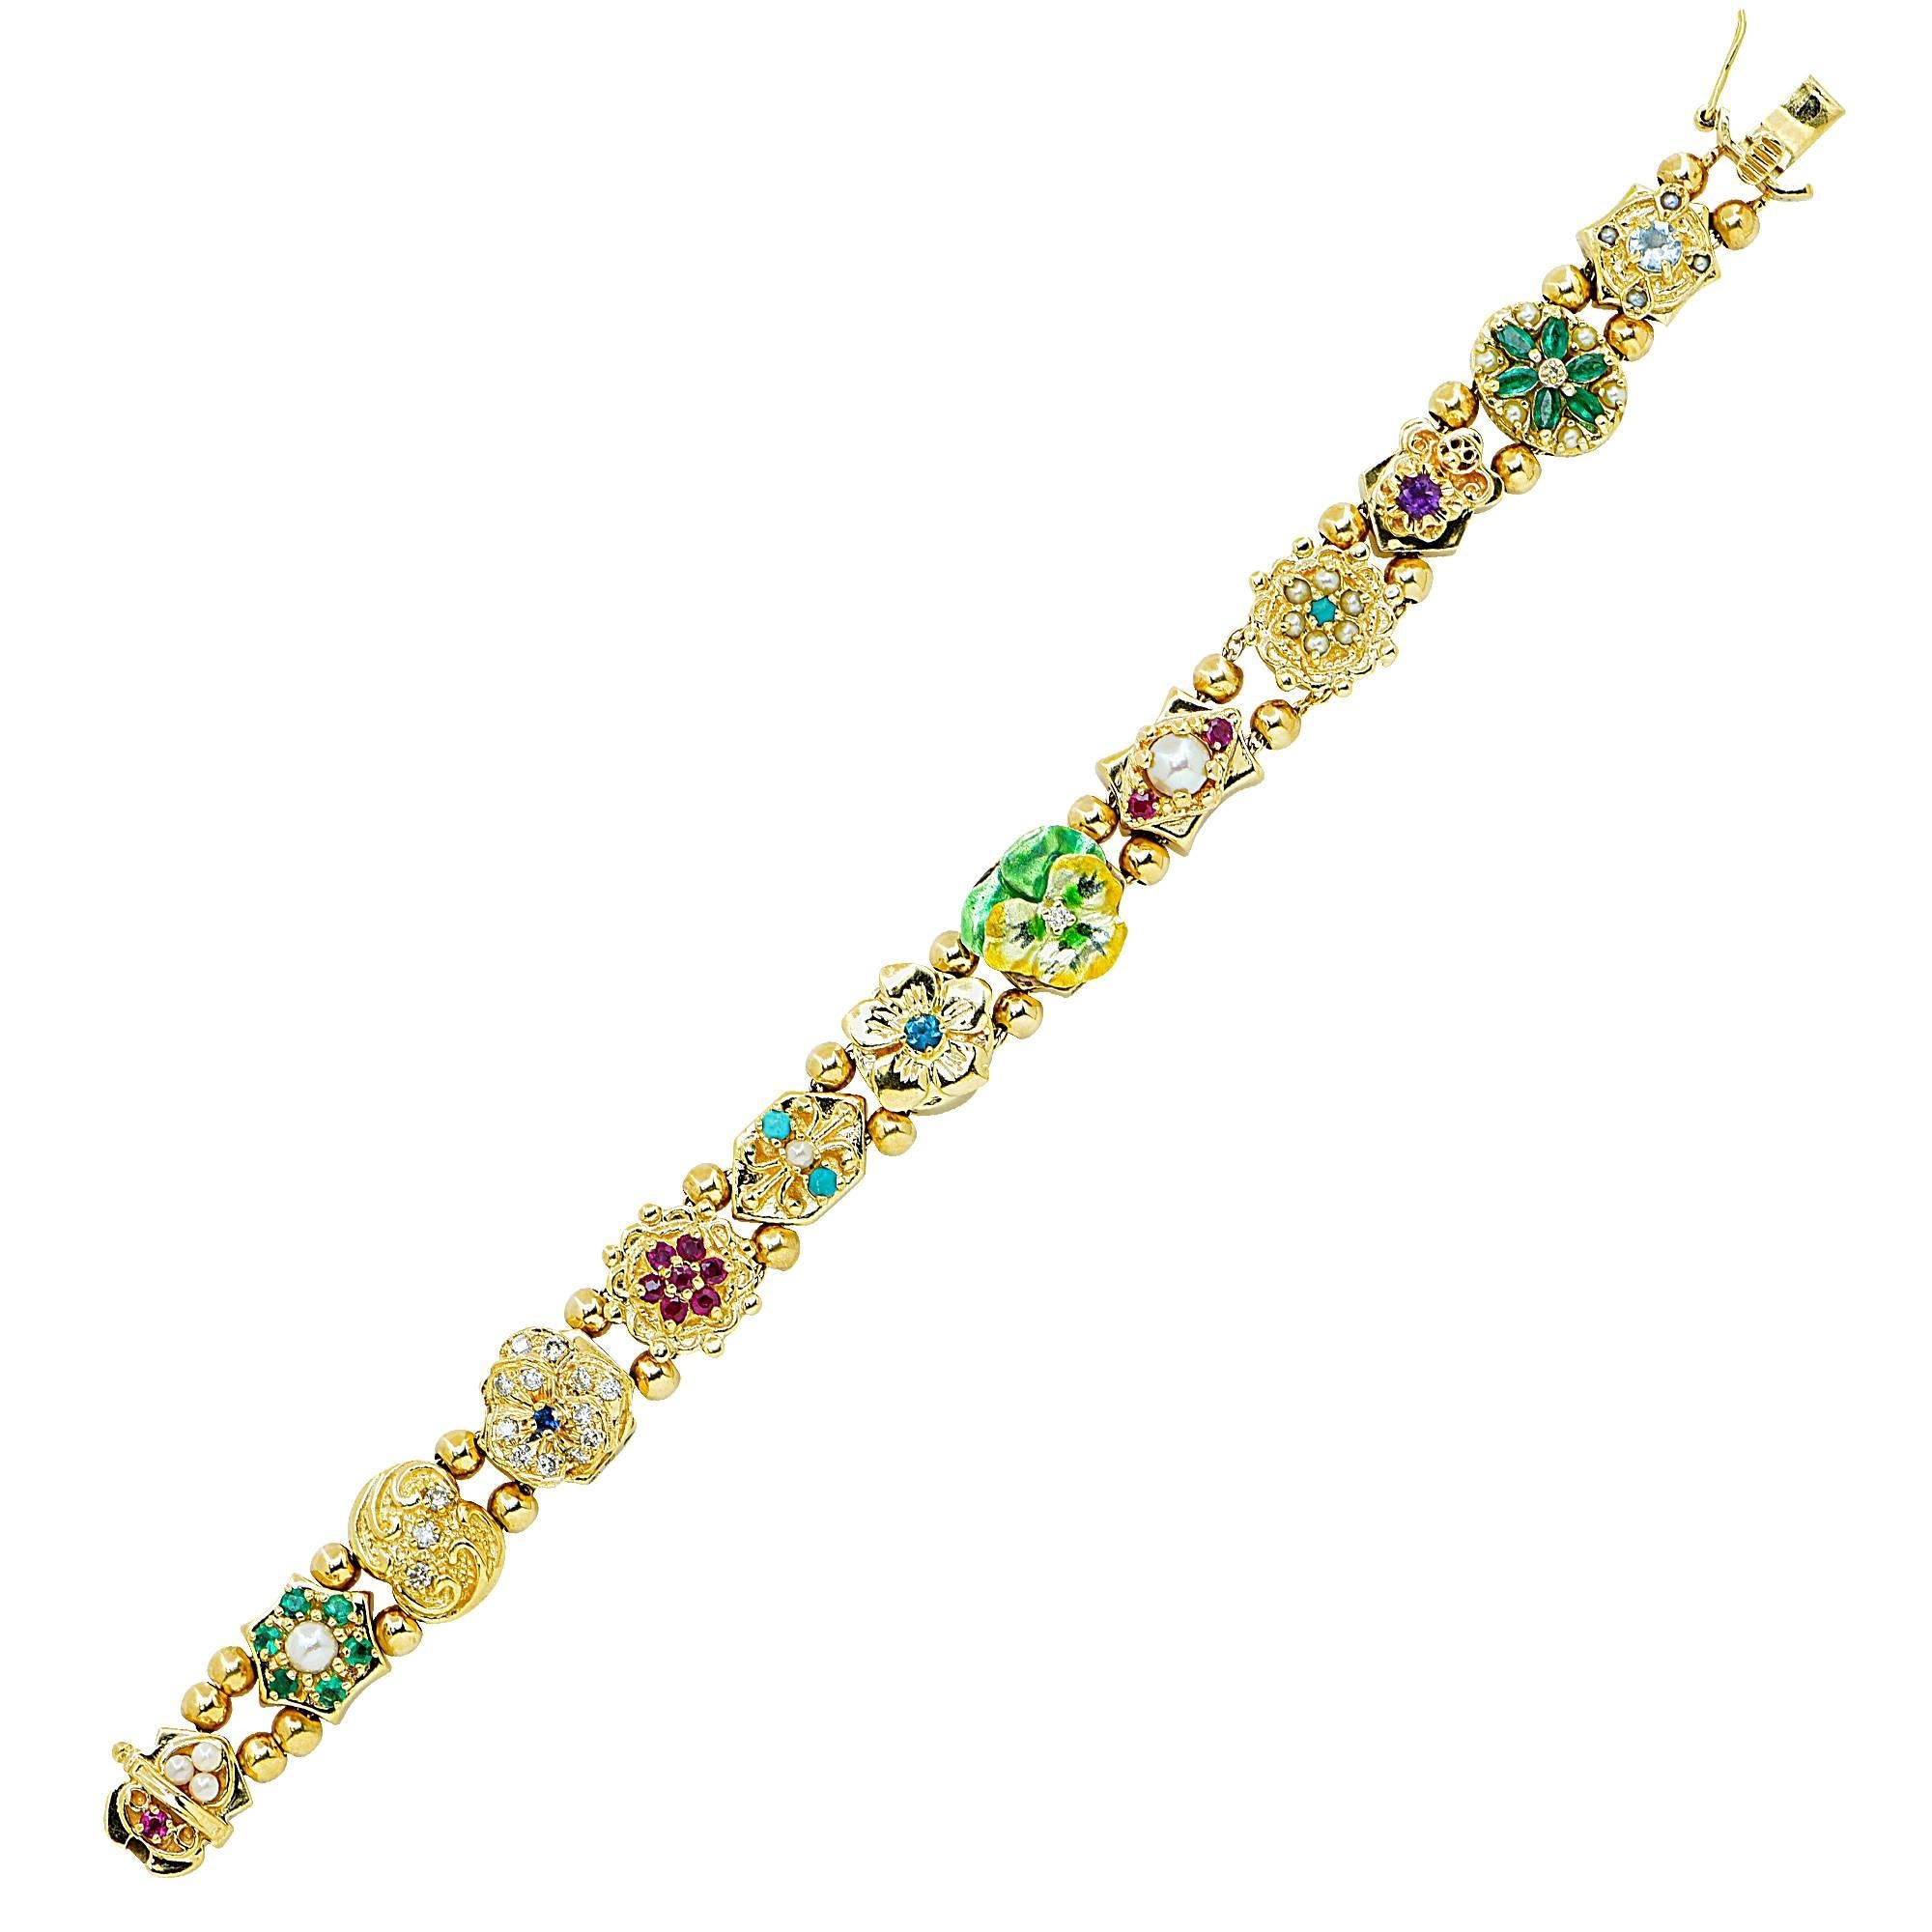 14k yellow gold vintage slide bracelet featuring enamel, pearls, amethyst and round brilliant cut diamonds.

Metal weight: 47.27 grams

This bracelet is accompanied by a retail appraisal performed by a GIA Graduate Gemologist.